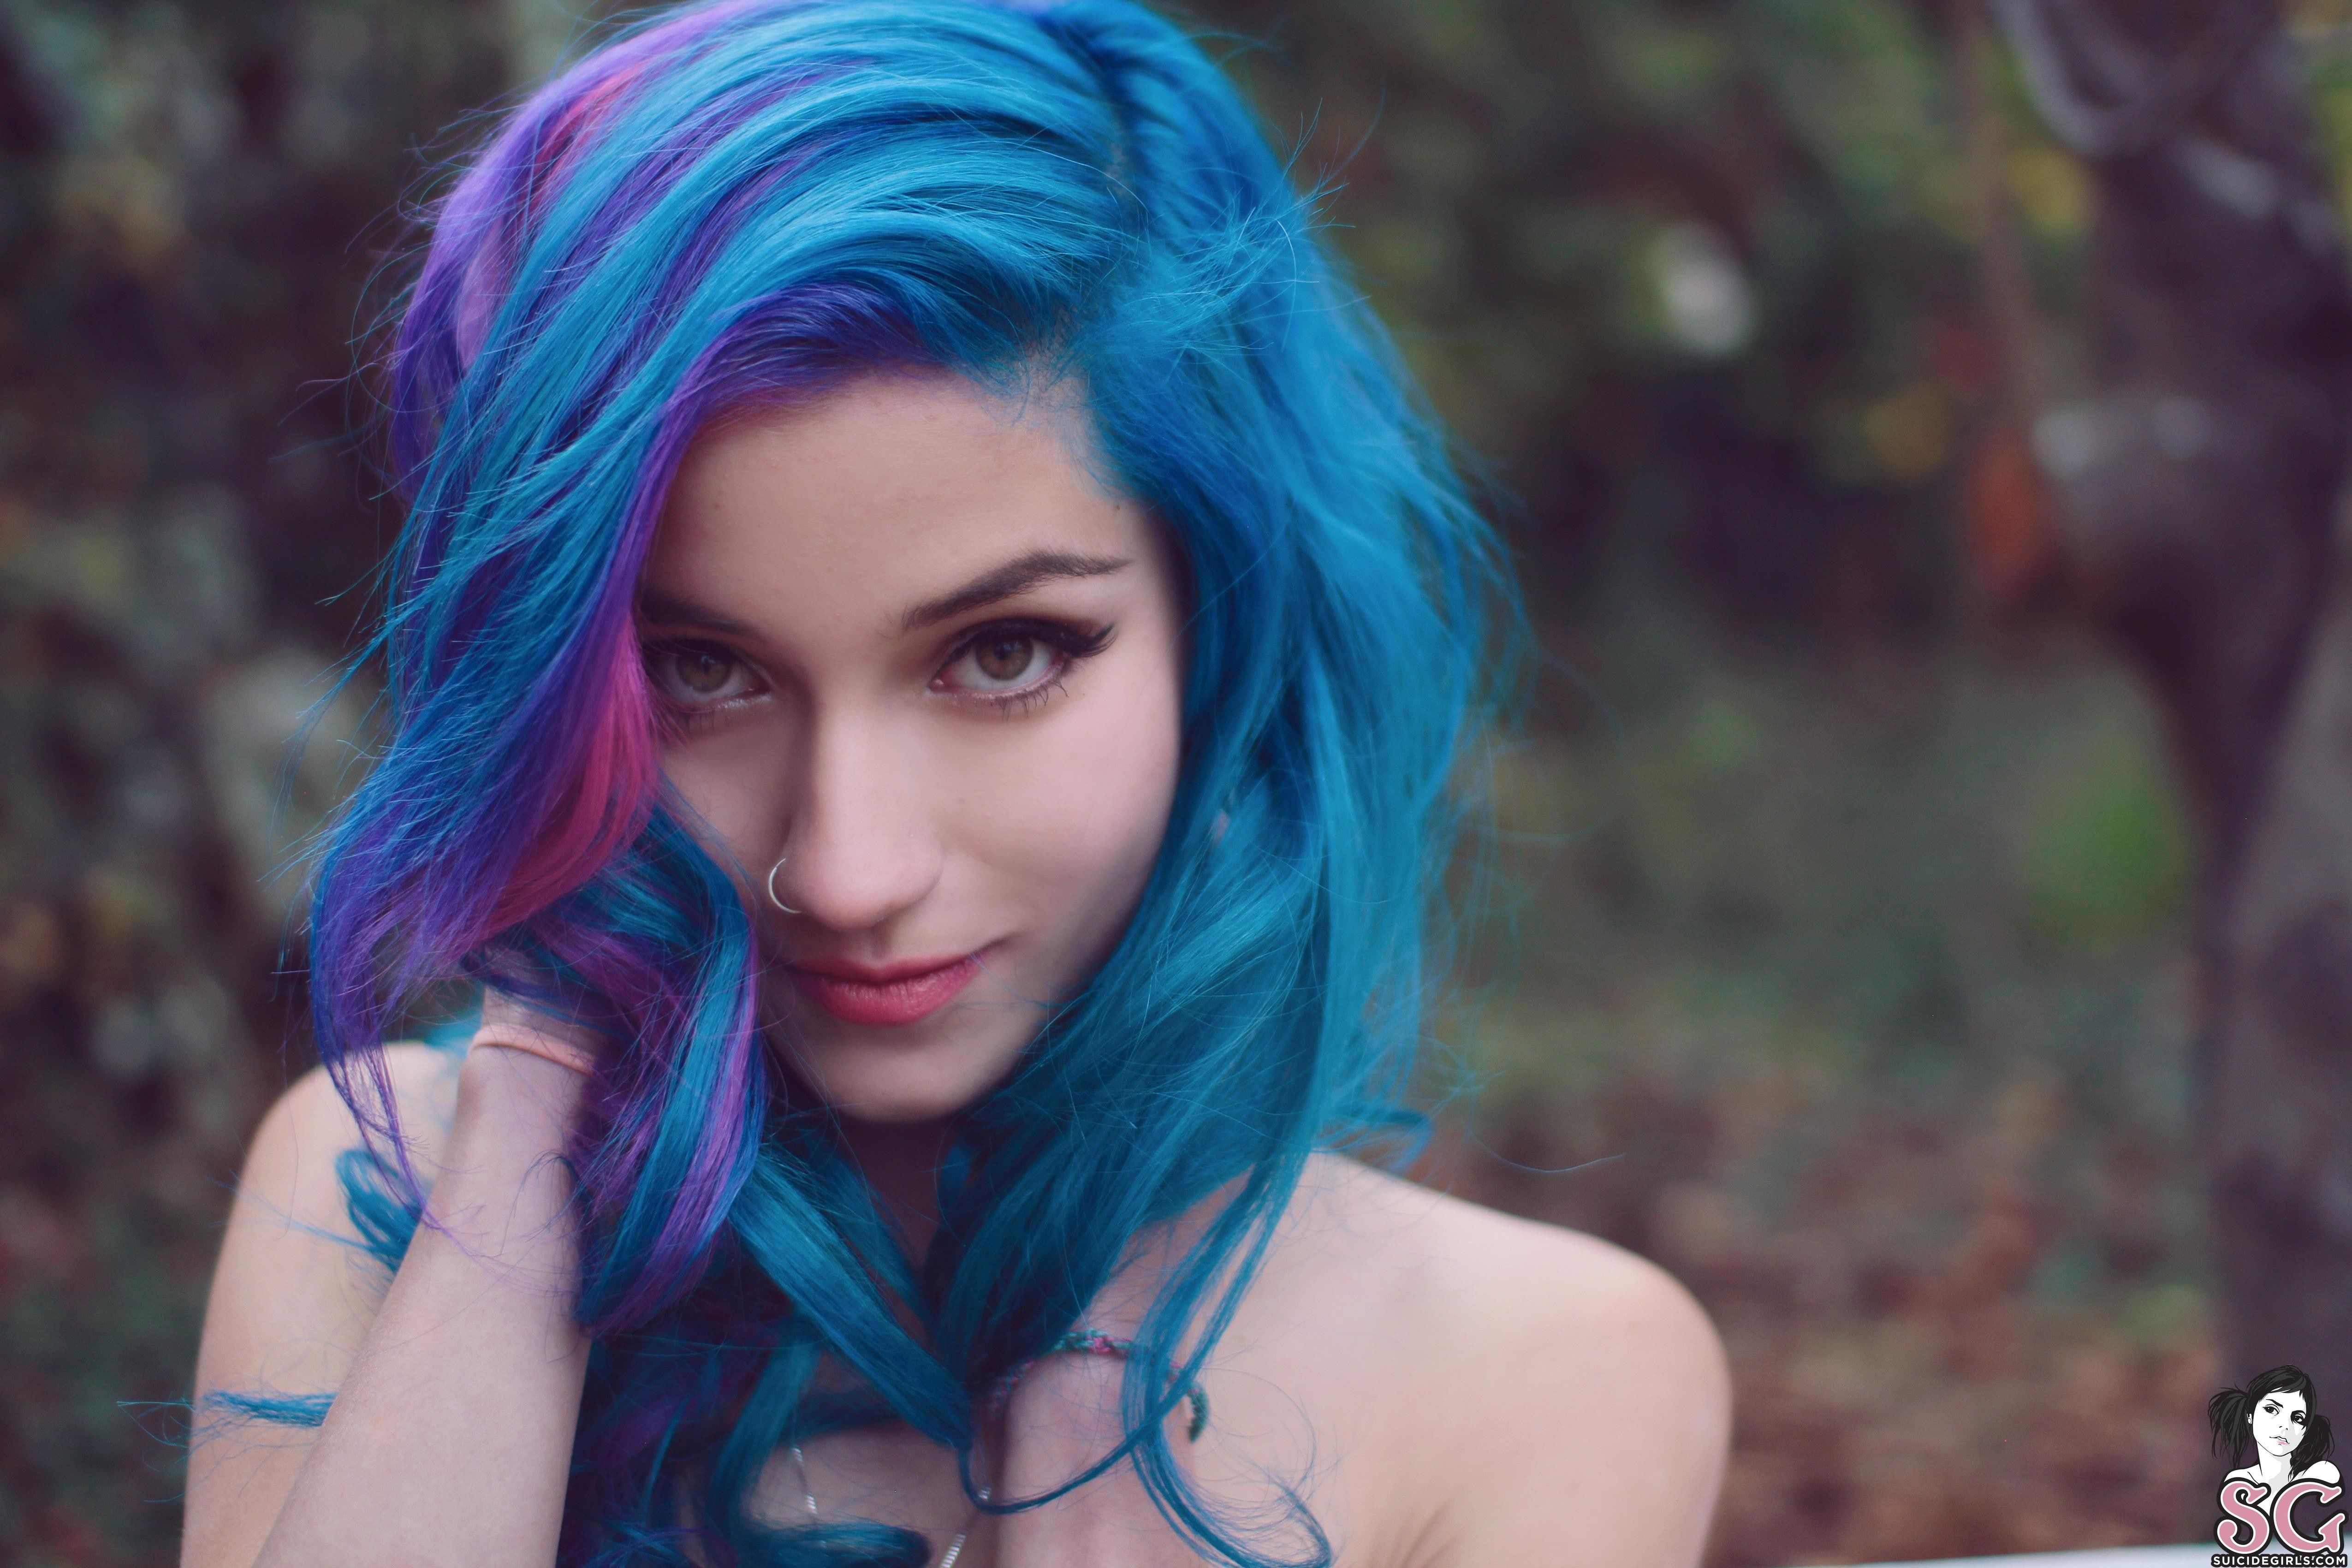 Curvy Girl Dancing with Blue Hair - wide 4